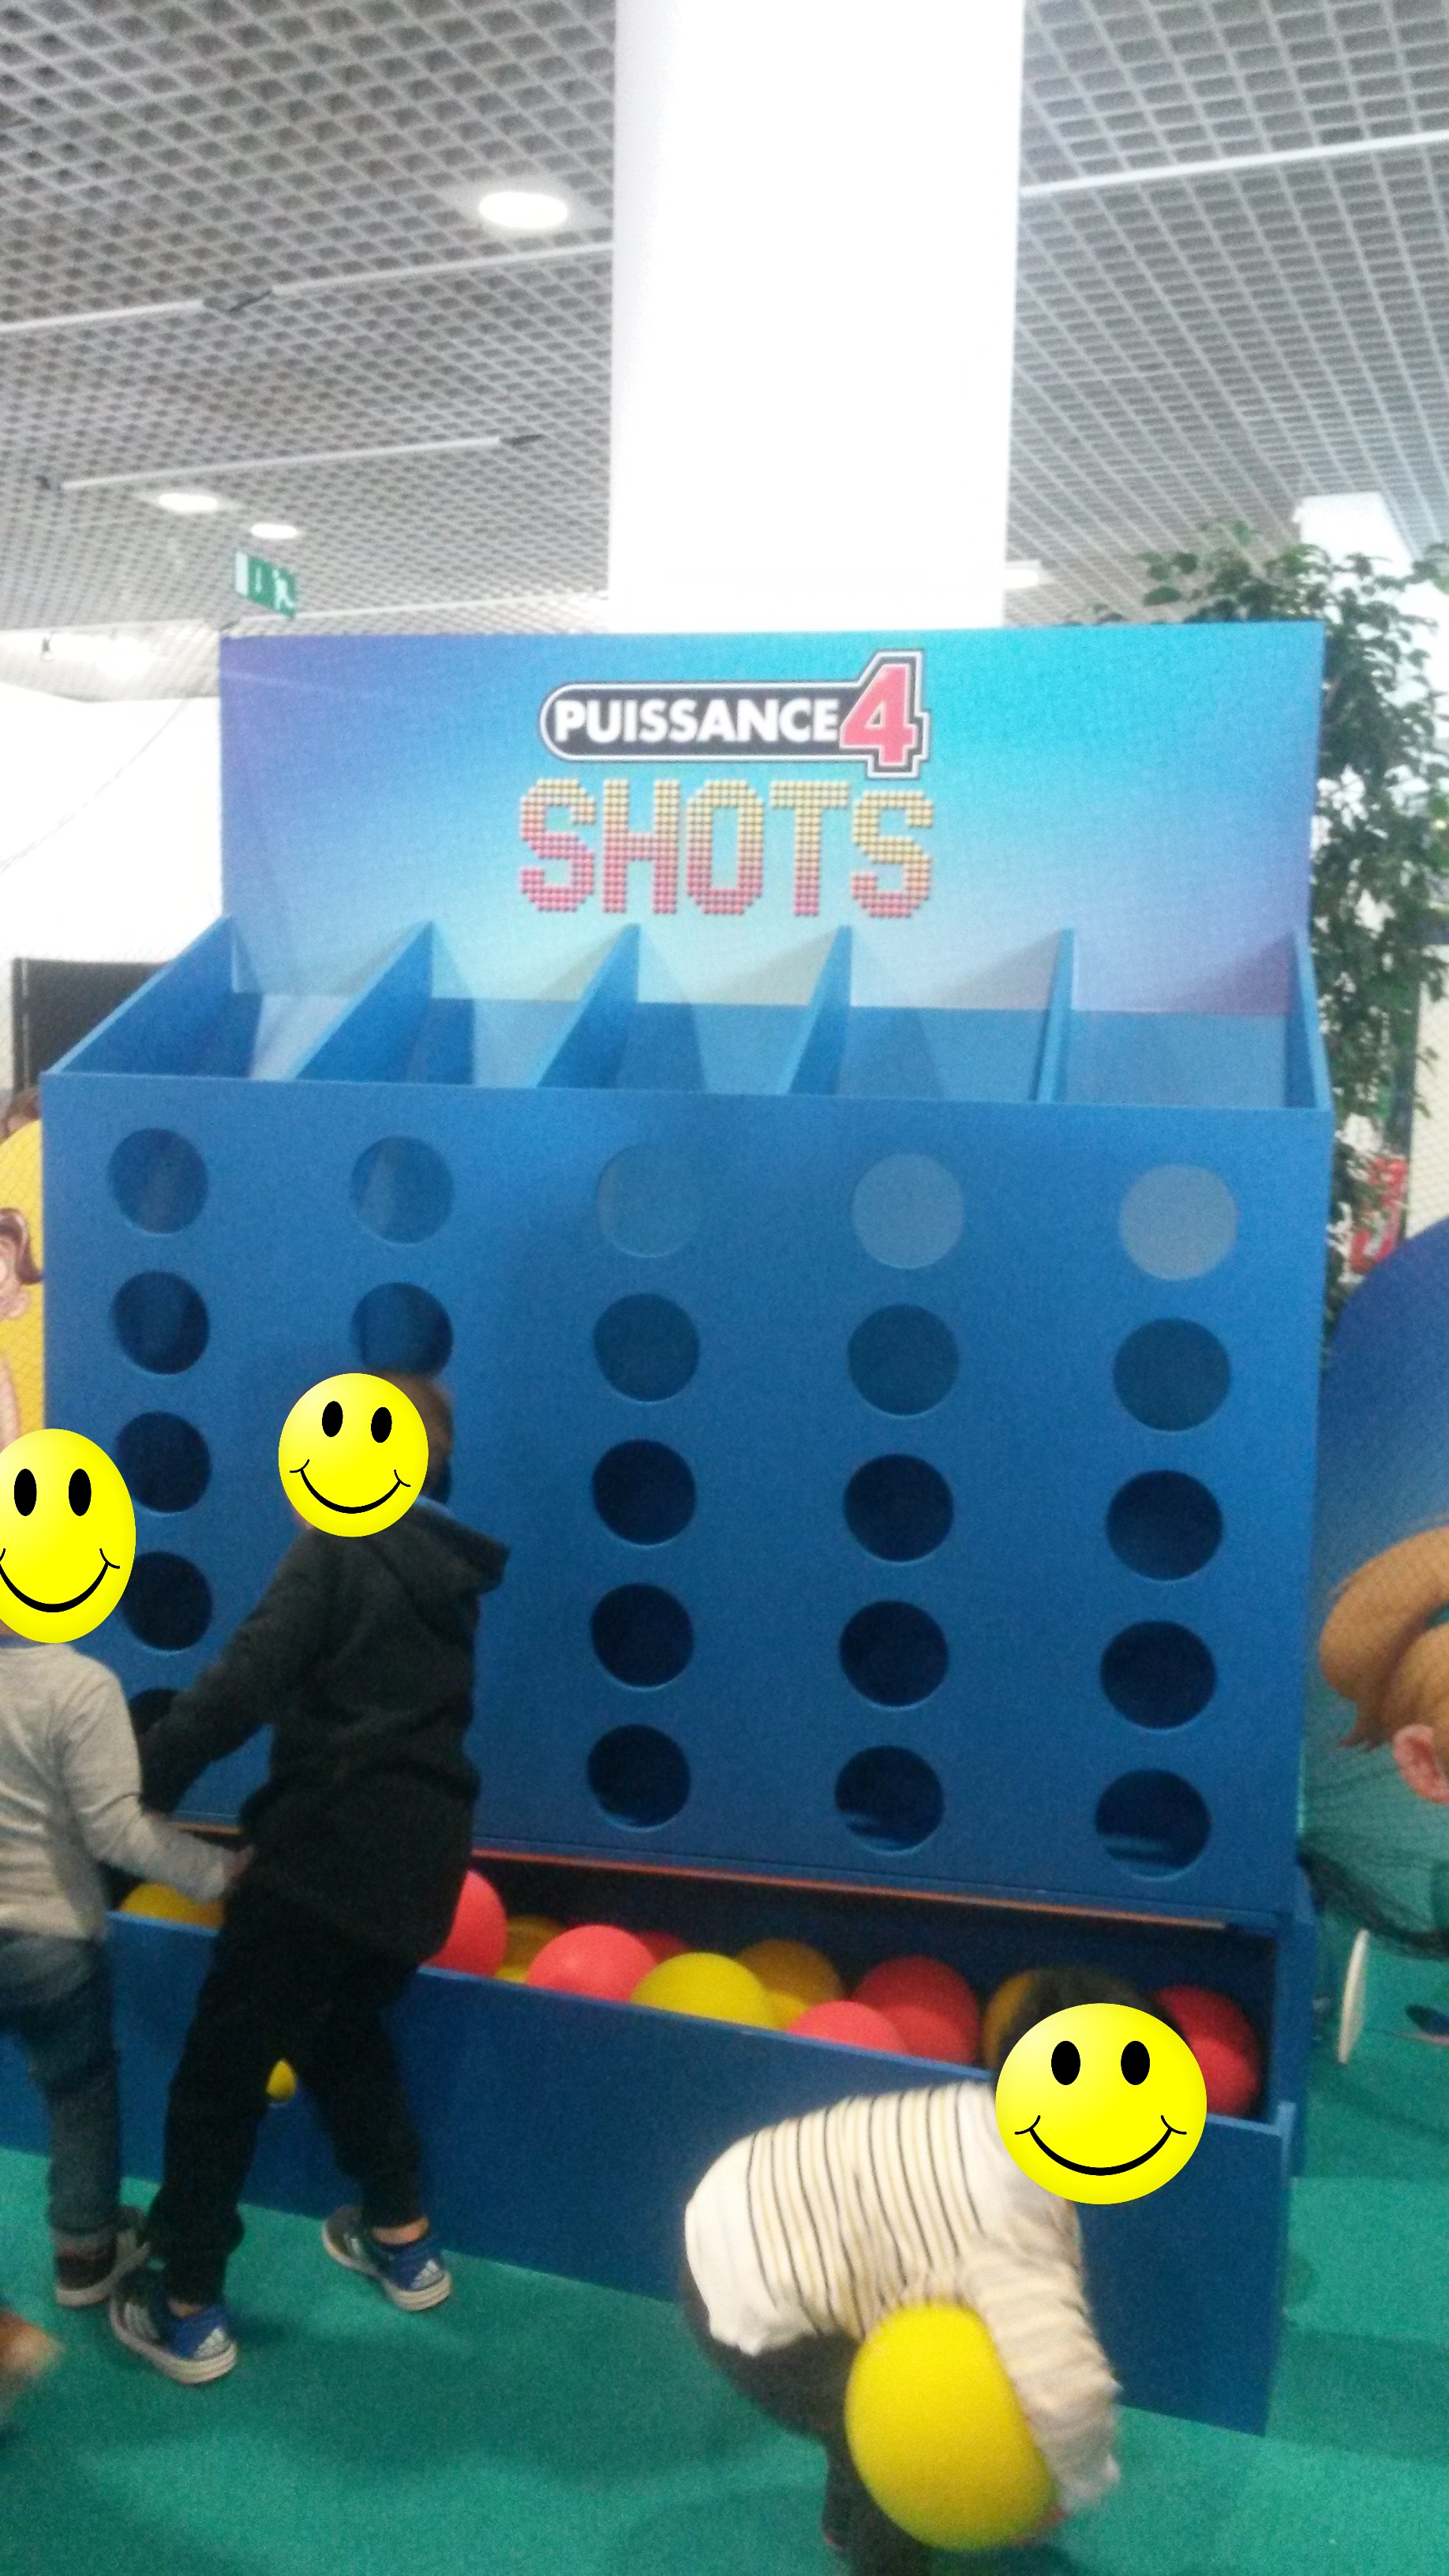 A giant connect 4 shoot to be successful with shoots